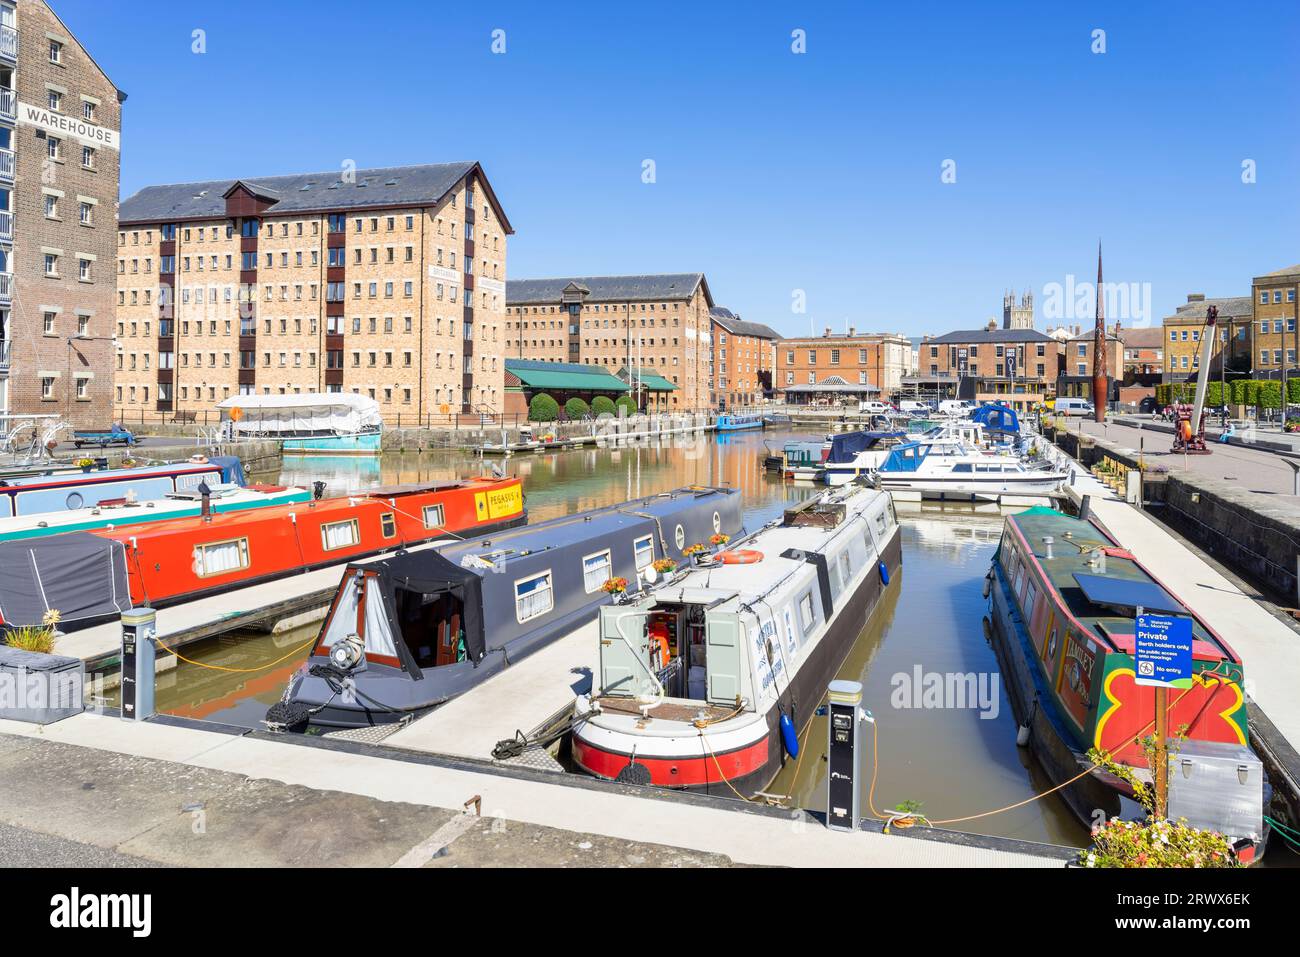 Gloucester docks narrowboats in Victoria Basin with Victorian warehouses converted into apartments Gloucester Gloucestershire England UK GB Europe Stock Photo